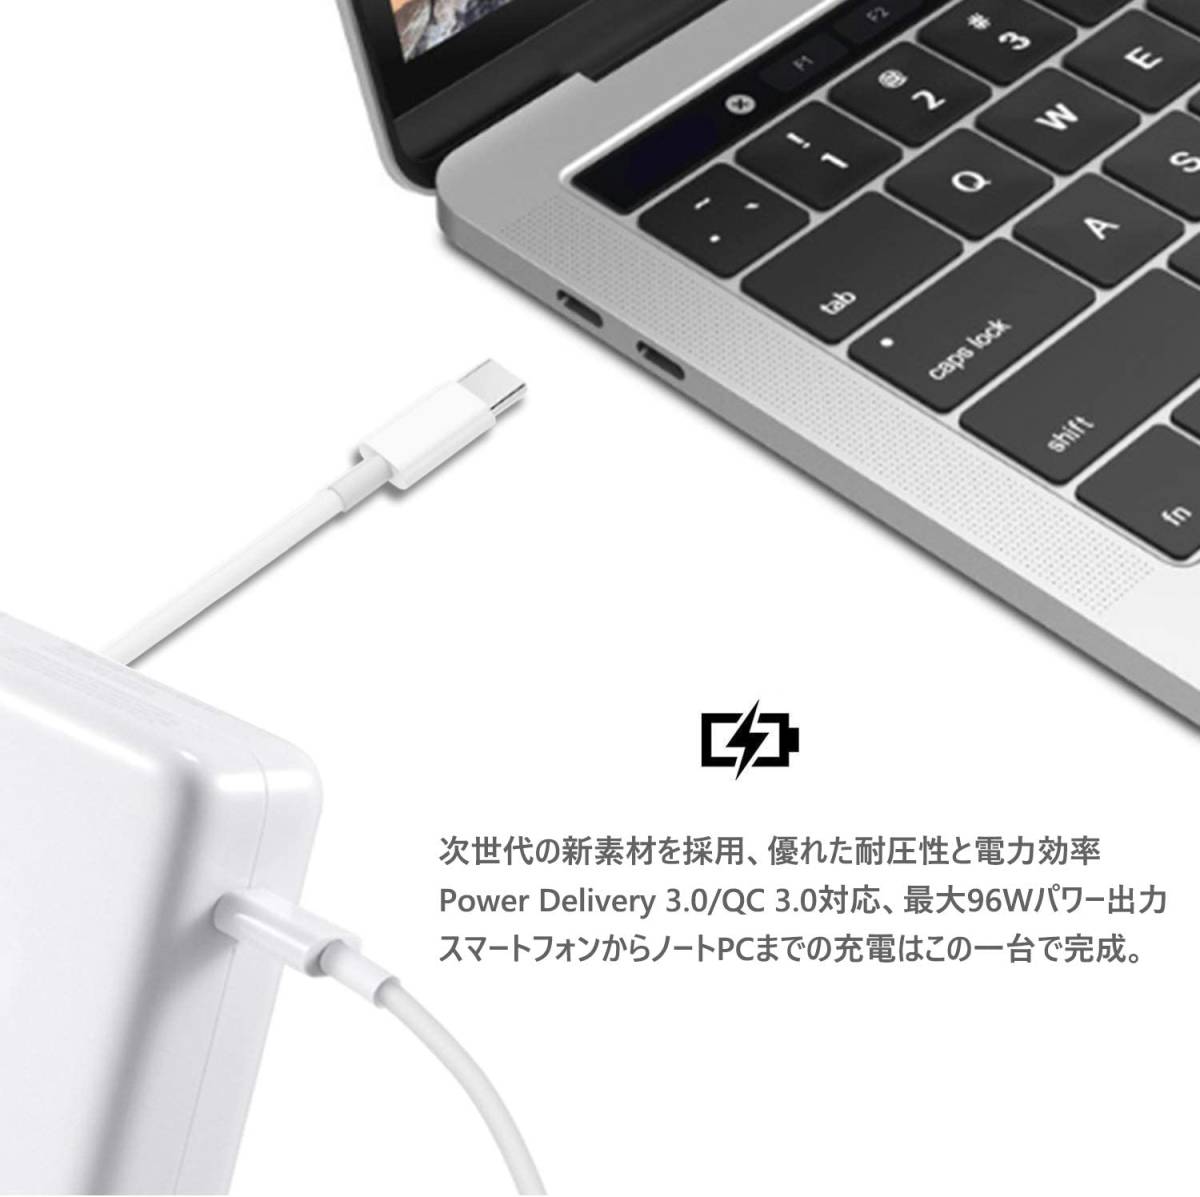 96W power supply adapter sudden speed USB-C PD correspondence fast charger Type C AC charger MacBook Pro/ nintendo Switch